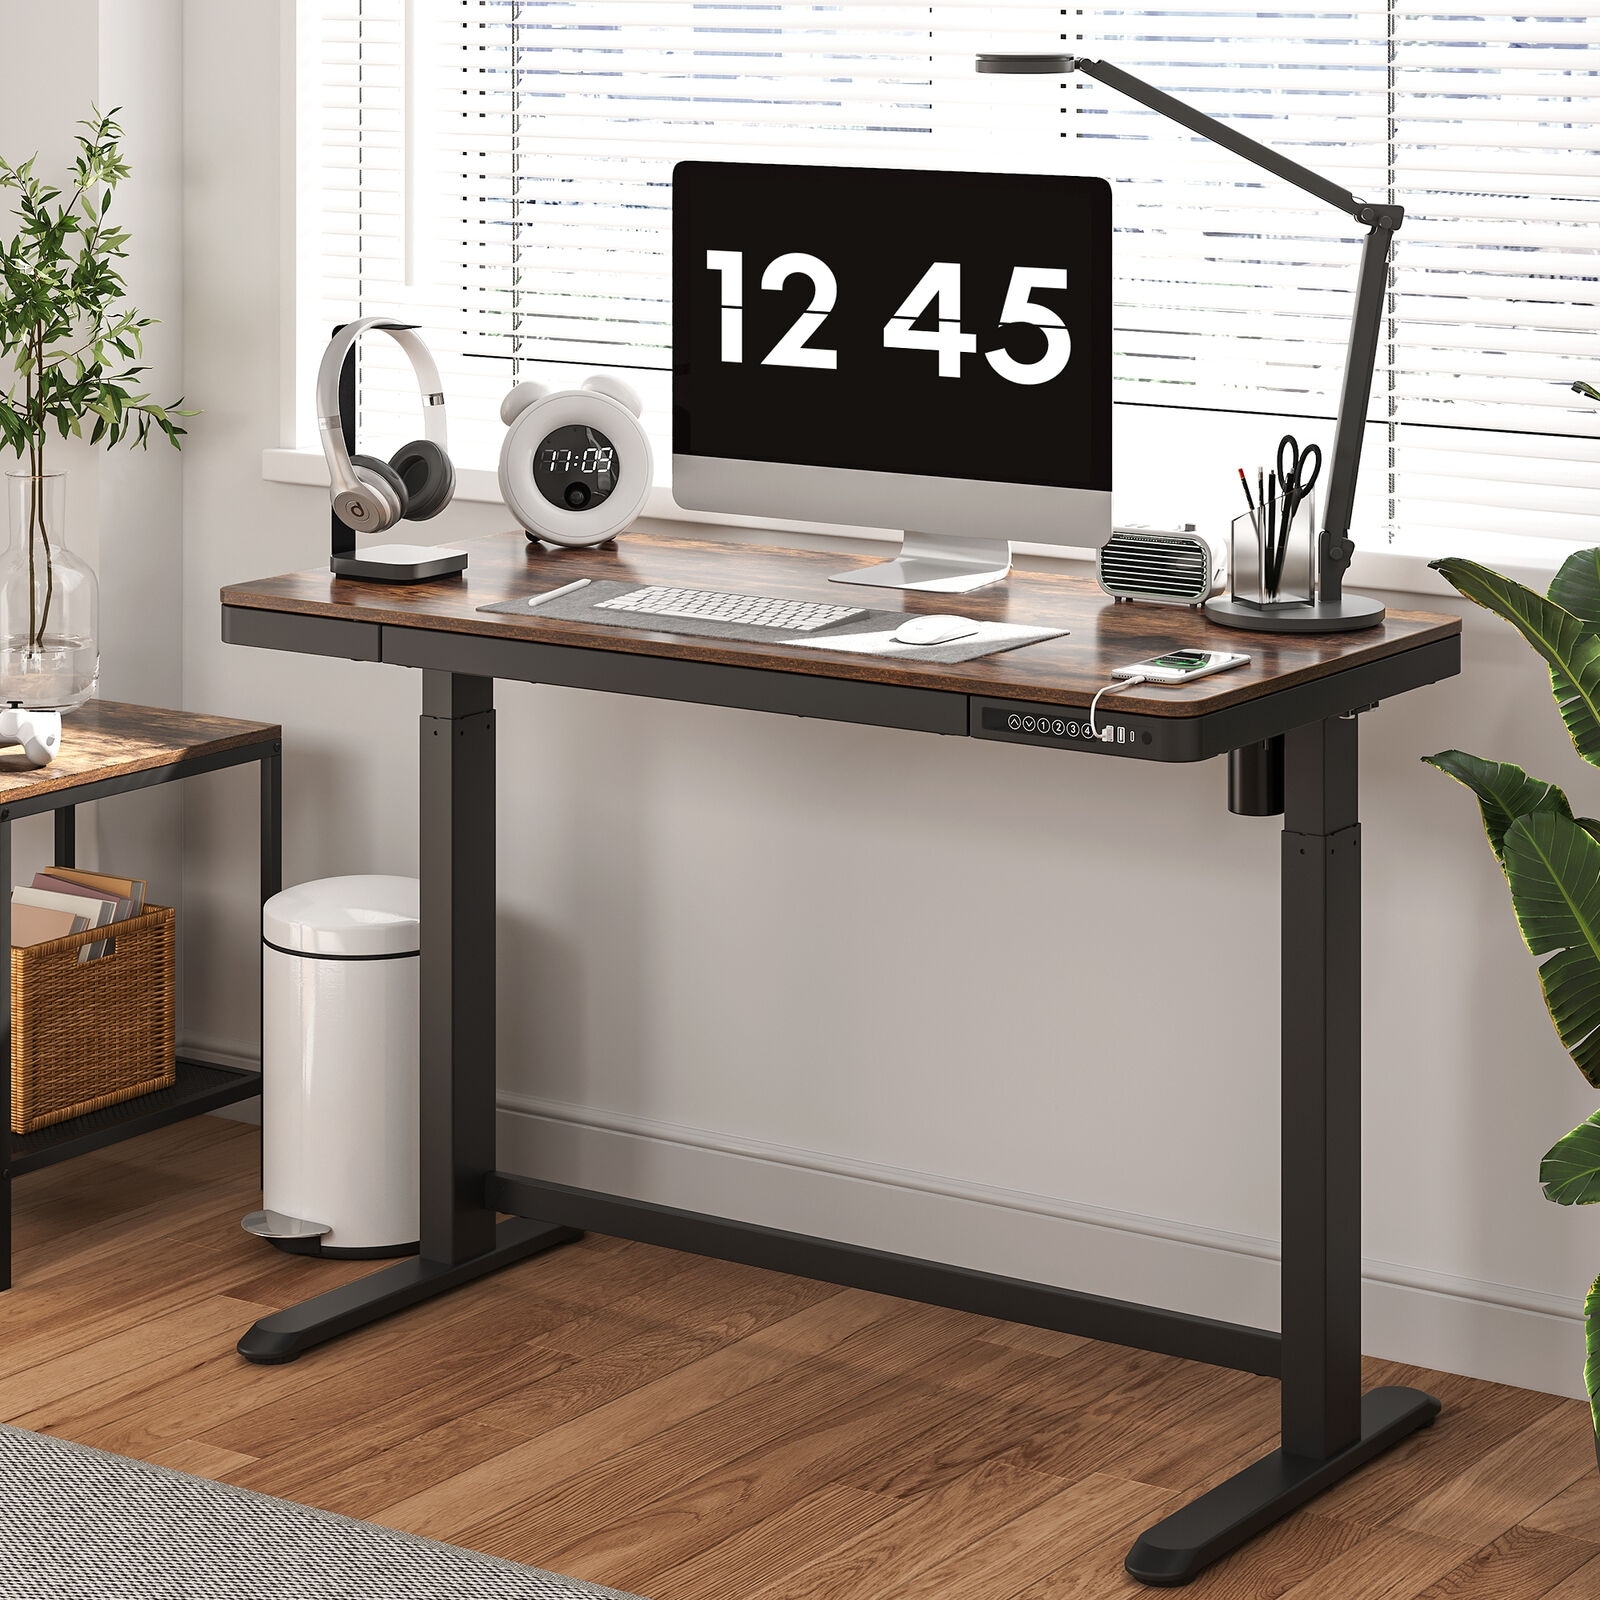 https://ak1.ostkcdn.com/images/products/is/images/direct/73c42a92e324a035562b2f21e10618c68df5c5df/FlexiSpot-48%22-Electric-Height-Adjustable-Standing-Desk-Office-Desk-with-Drawer%2C-USB-Port.jpg